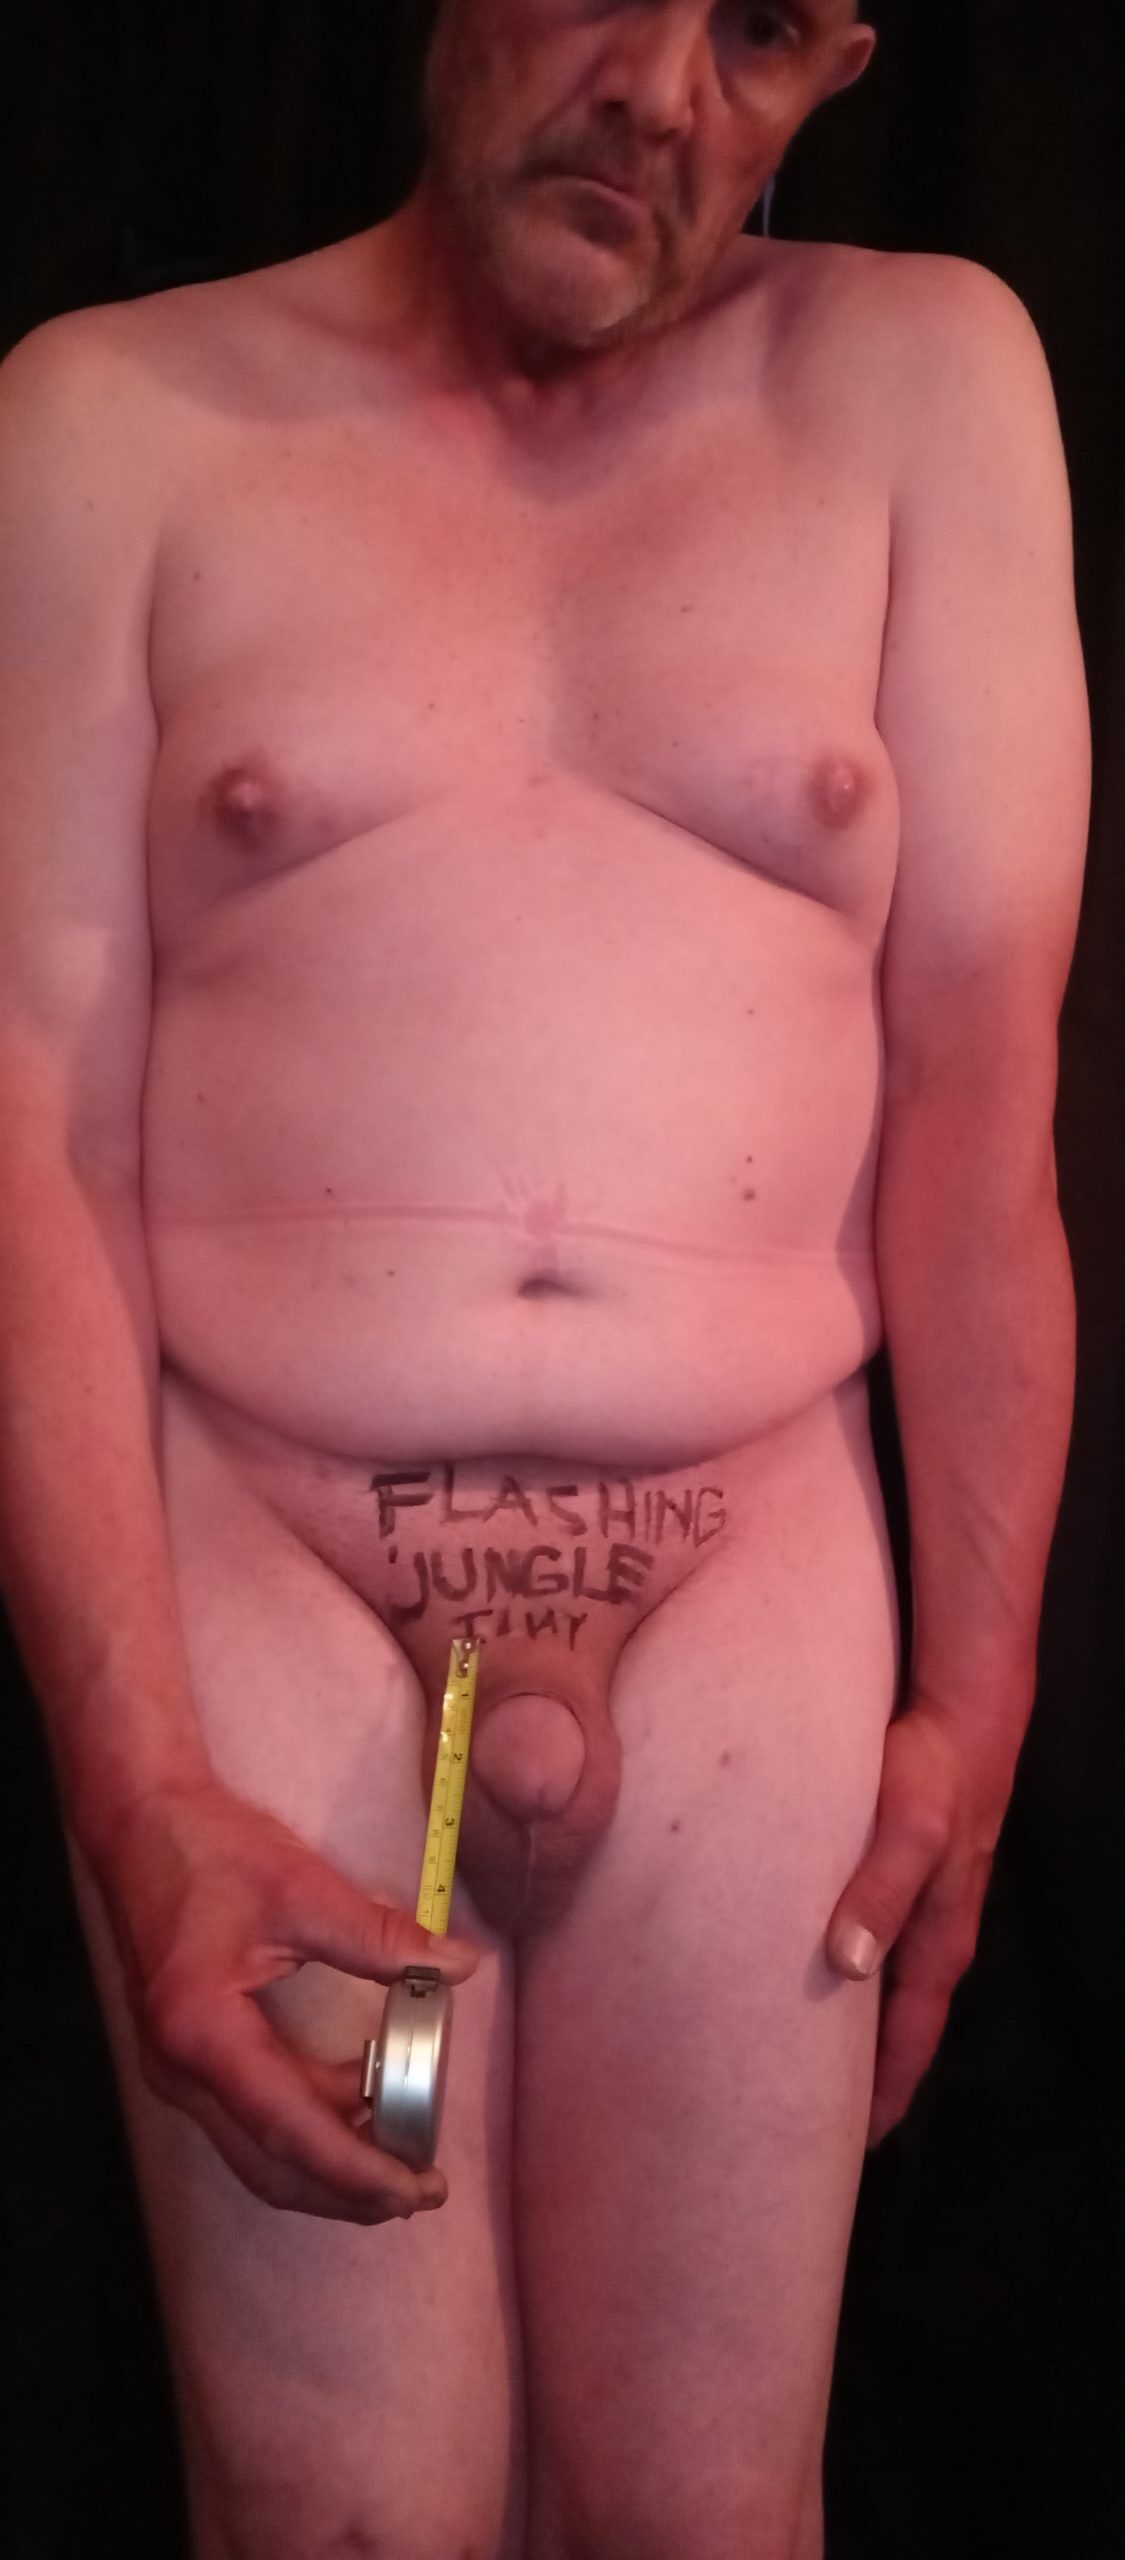 Real Amateurs Dick Flash Pics - Part2TINY PENIS DAVE Bishop-EXPOSED Completely NUDE